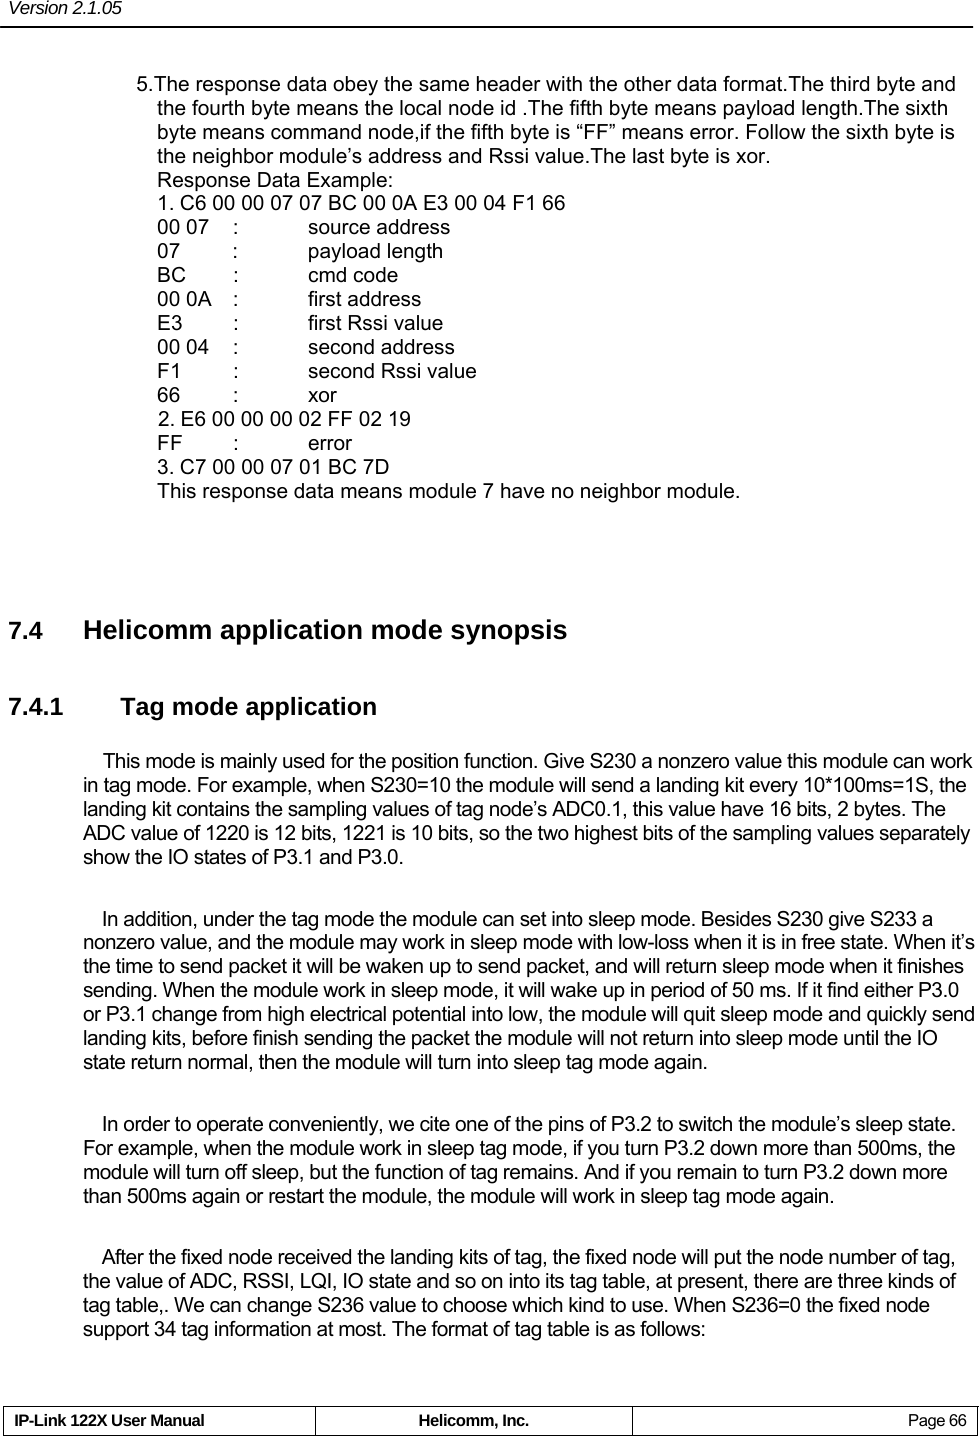 Version 2.1.05     IP-Link 122X User Manual  Helicomm, Inc.  Page 66 5.The response data obey the same header with the other data format.The third byte and the fourth byte means the local node id .The fifth byte means payload length.The sixth byte means command node,if the fifth byte is “FF” means error. Follow the sixth byte is the neighbor module’s address and Rssi value.The last byte is xor.                    Response Data Example:                                                           1. C6 00 00 07 07 BC 00 0A E3 00 04 F1 66                                        00 07   :     source address                                                        07     :      payload length                                                        BC     :     cmd code                                                             00 0A  :  first address                                                     E3  :  first Rssi value                                                    00 04  :    second address                                                  F1  :  second Rssi value                                                 66 : xor                2. E6 00 00 00 02 FF 02 19                                                      FF  :  error                                                            3. C7 00 00 07 01 BC 7D                                                        This response data means module 7 have no neighbor module.  7.4  Helicomm application mode synopsis 7.4.1  Tag mode application This mode is mainly used for the position function. Give S230 a nonzero value this module can work in tag mode. For example, when S230=10 the module will send a landing kit every 10*100ms=1S, the landing kit contains the sampling values of tag node’s ADC0.1, this value have 16 bits, 2 bytes. The ADC value of 1220 is 12 bits, 1221 is 10 bits, so the two highest bits of the sampling values separately show the IO states of P3.1 and P3.0.     In addition, under the tag mode the module can set into sleep mode. Besides S230 give S233 a nonzero value, and the module may work in sleep mode with low-loss when it is in free state. When it’s the time to send packet it will be waken up to send packet, and will return sleep mode when it finishes sending. When the module work in sleep mode, it will wake up in period of 50 ms. If it find either P3.0 or P3.1 change from high electrical potential into low, the module will quit sleep mode and quickly send landing kits, before finish sending the packet the module will not return into sleep mode until the IO state return normal, then the module will turn into sleep tag mode again.     In order to operate conveniently, we cite one of the pins of P3.2 to switch the module’s sleep state. For example, when the module work in sleep tag mode, if you turn P3.2 down more than 500ms, the module will turn off sleep, but the function of tag remains. And if you remain to turn P3.2 down more than 500ms again or restart the module, the module will work in sleep tag mode again.     After the fixed node received the landing kits of tag, the fixed node will put the node number of tag, the value of ADC, RSSI, LQI, IO state and so on into its tag table, at present, there are three kinds of tag table,. We can change S236 value to choose which kind to use. When S236=0 the fixed node support 34 tag information at most. The format of tag table is as follows:   